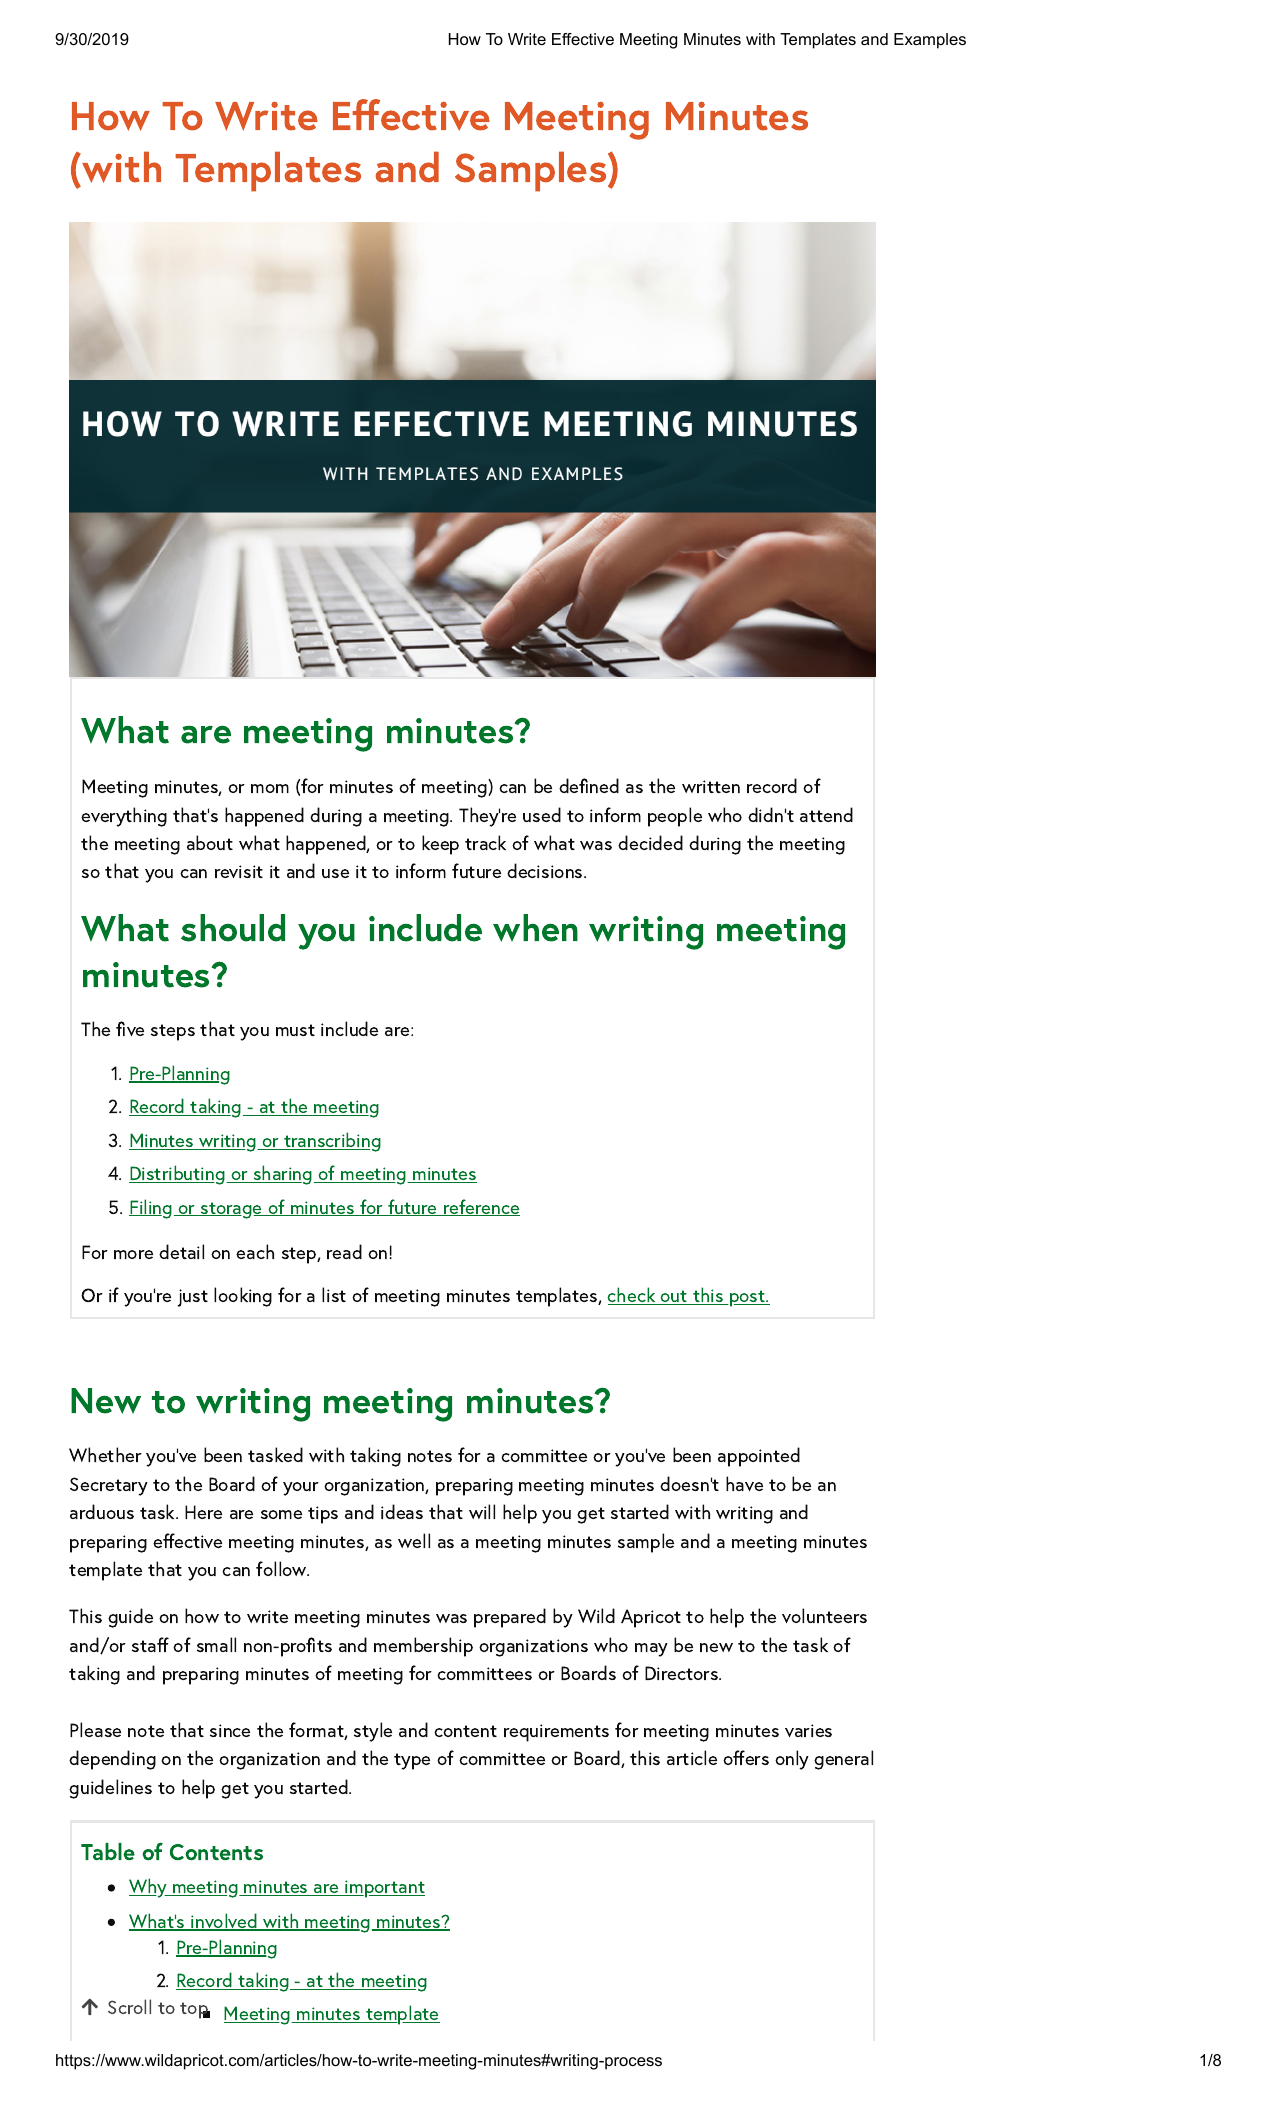 How To Write Effective Meeting Minutes with Templates and Examples